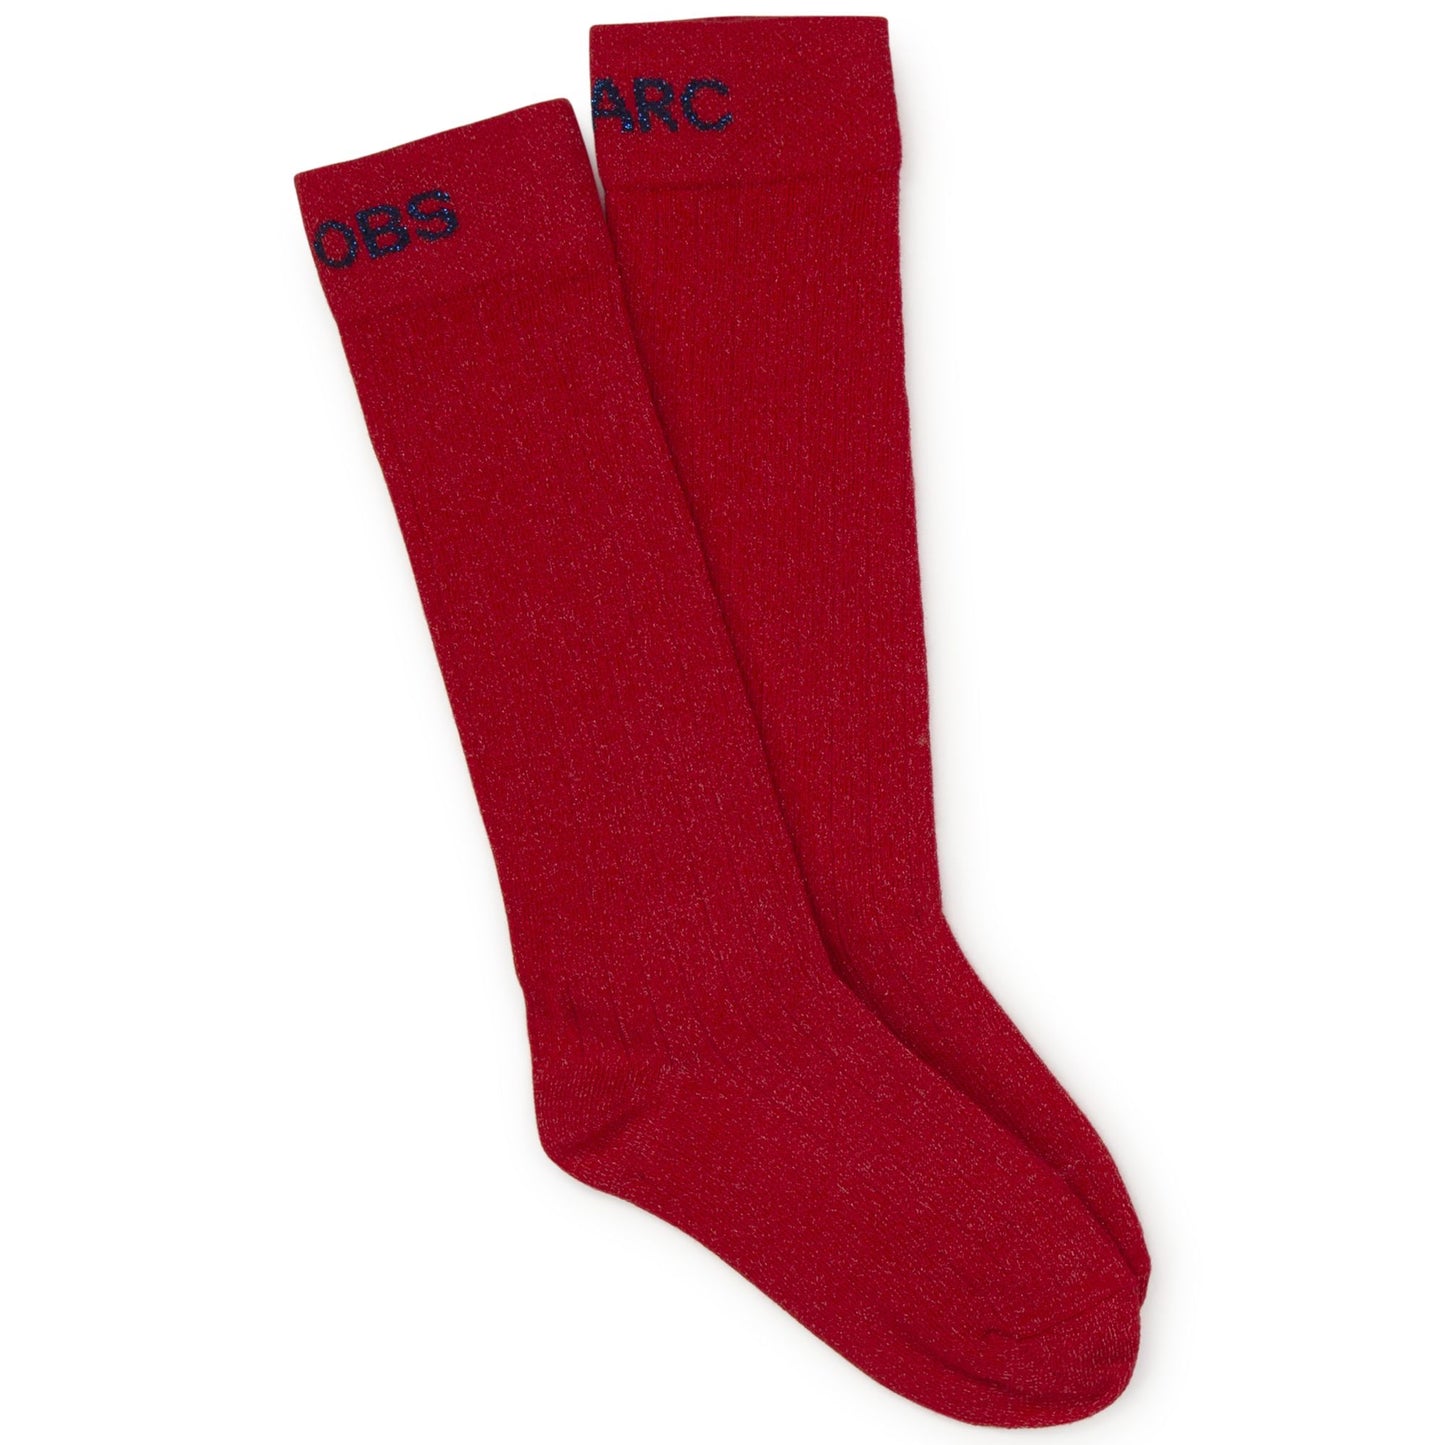 The Marc Jacobs Red Knee High Socks